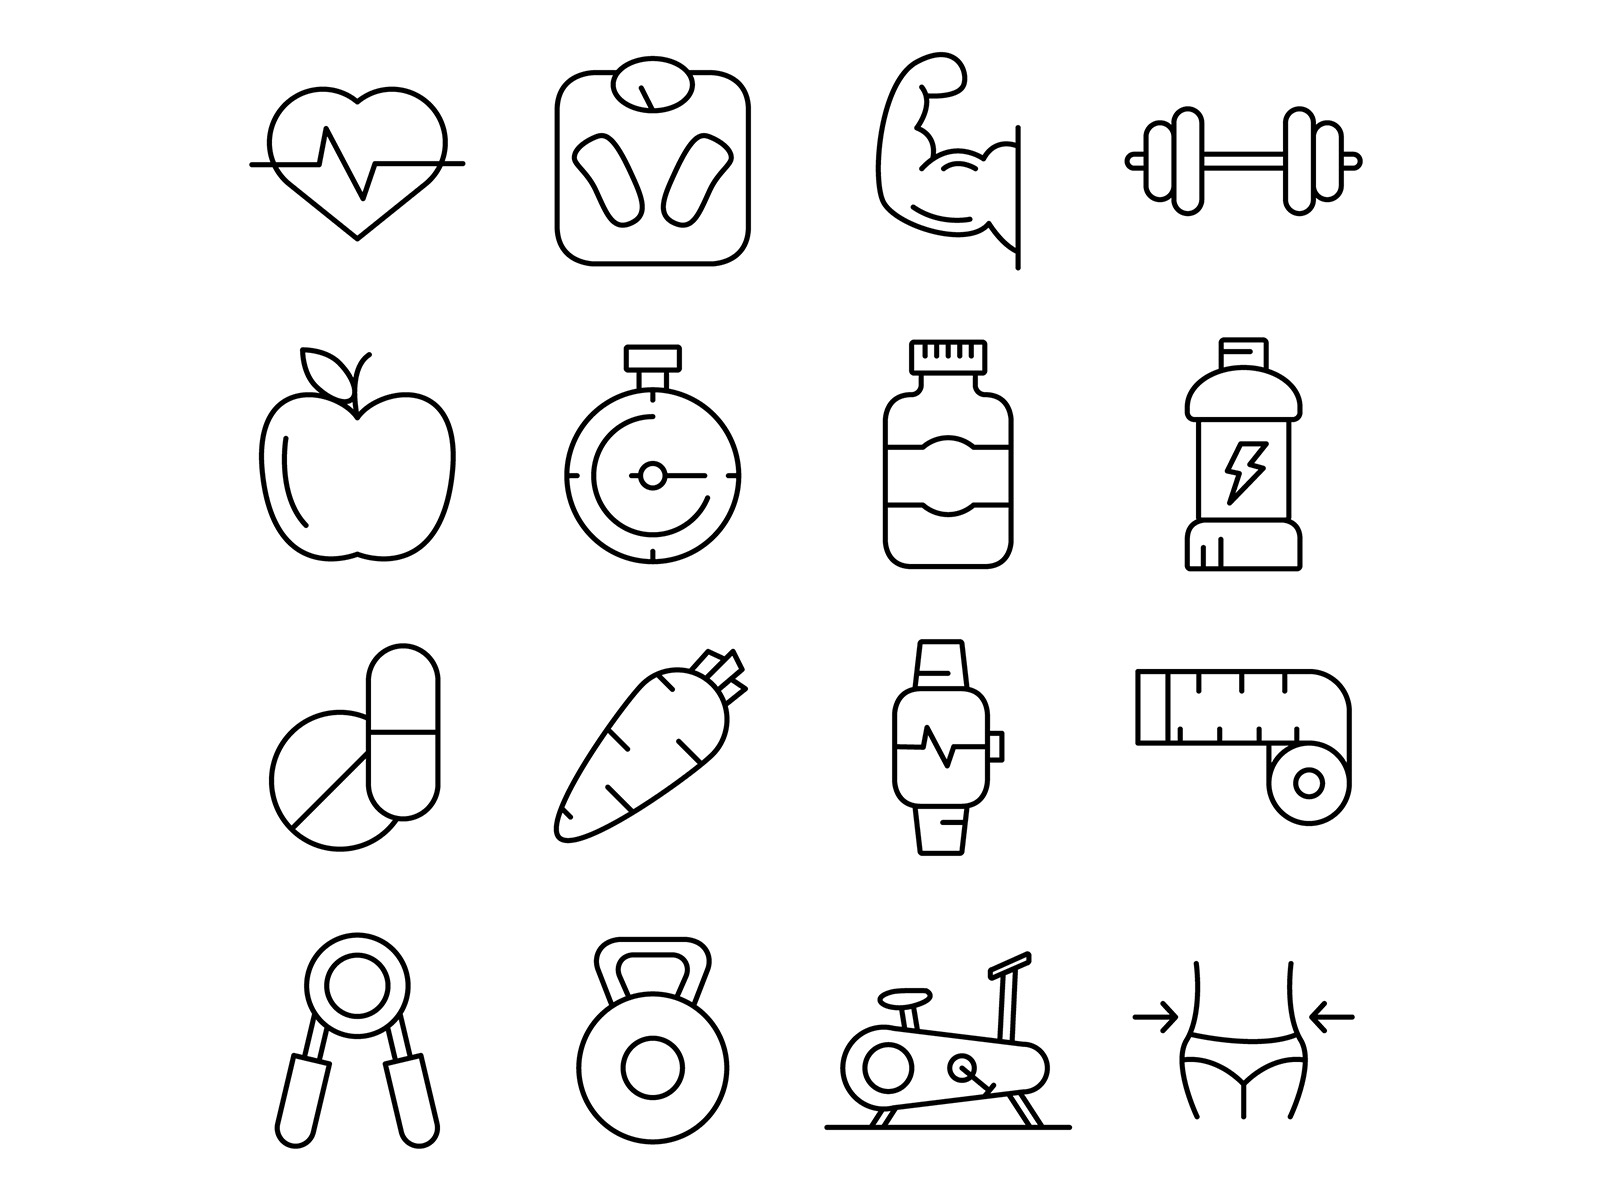 Fitness Vector Icons by Unblast on Dribbble